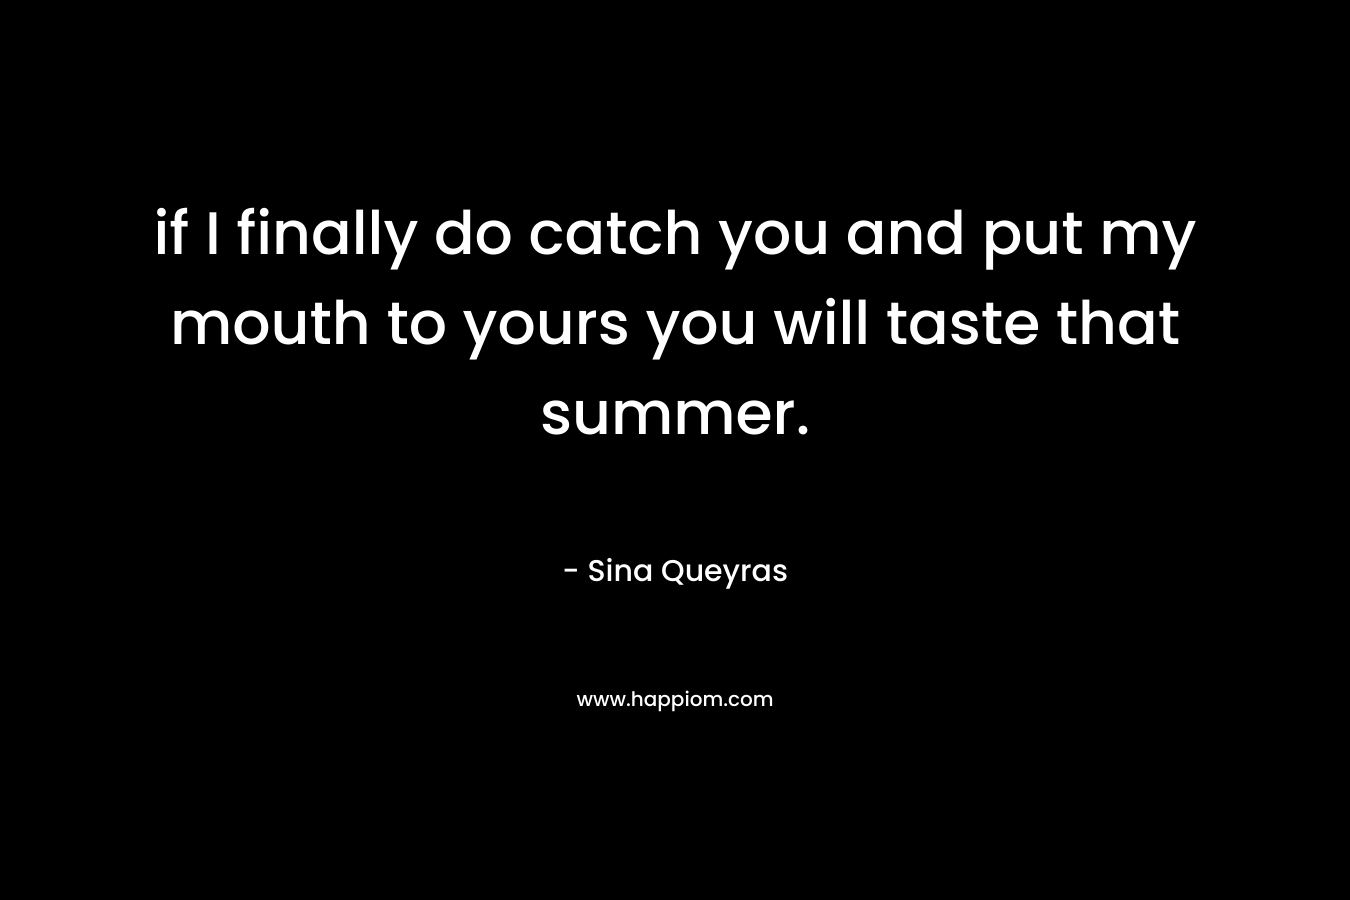 if I finally do catch you and put my mouth to yours you will taste that summer.